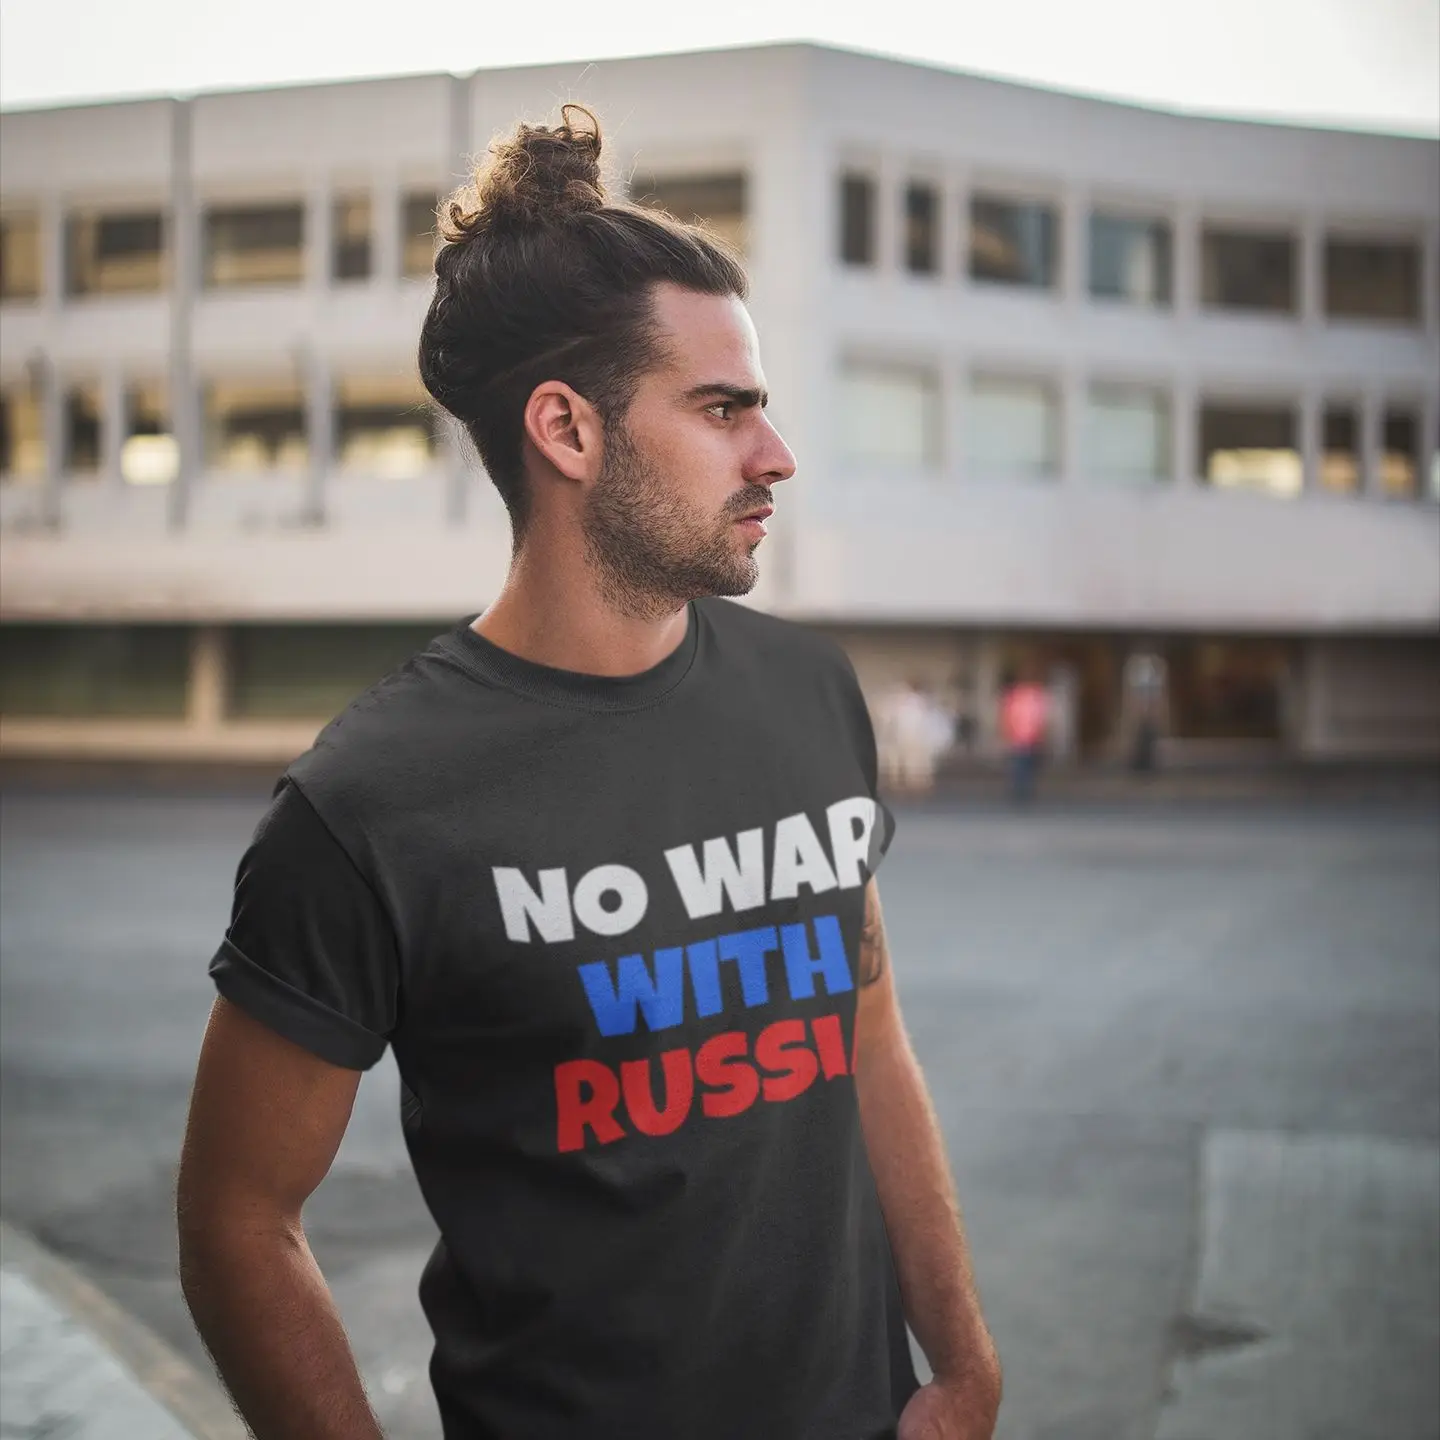 

No War With Russian T Shirt Peace and Love Retro T Shirts O Neck Print Awesome Tops for Mens 3XL 4XL 5XL Black Cotton Tshirt